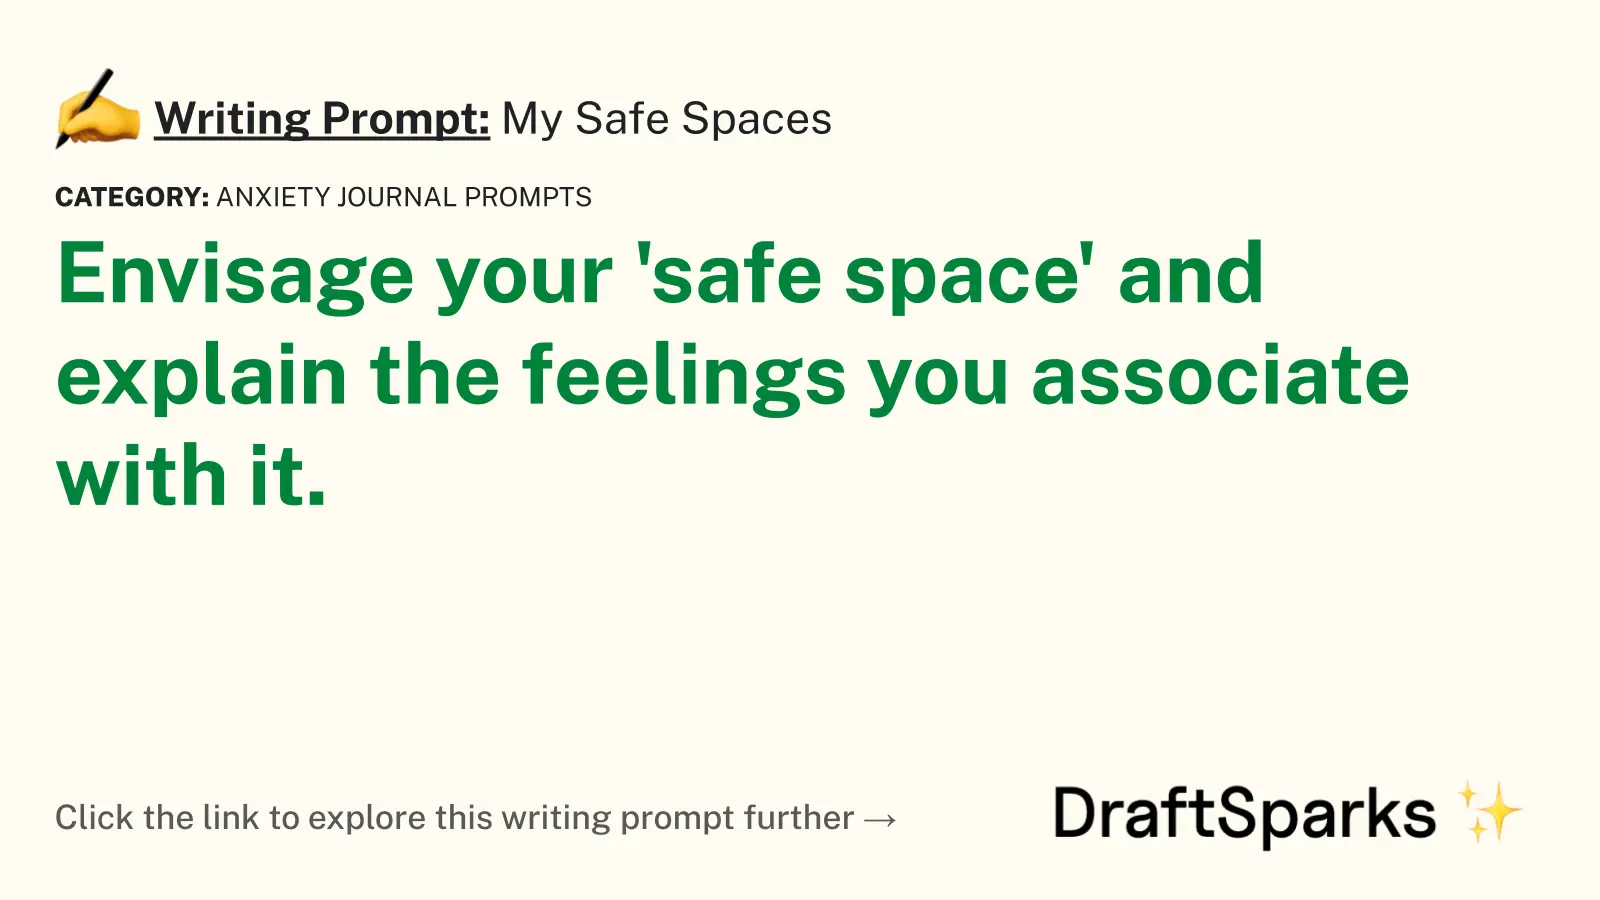 My Safe Spaces